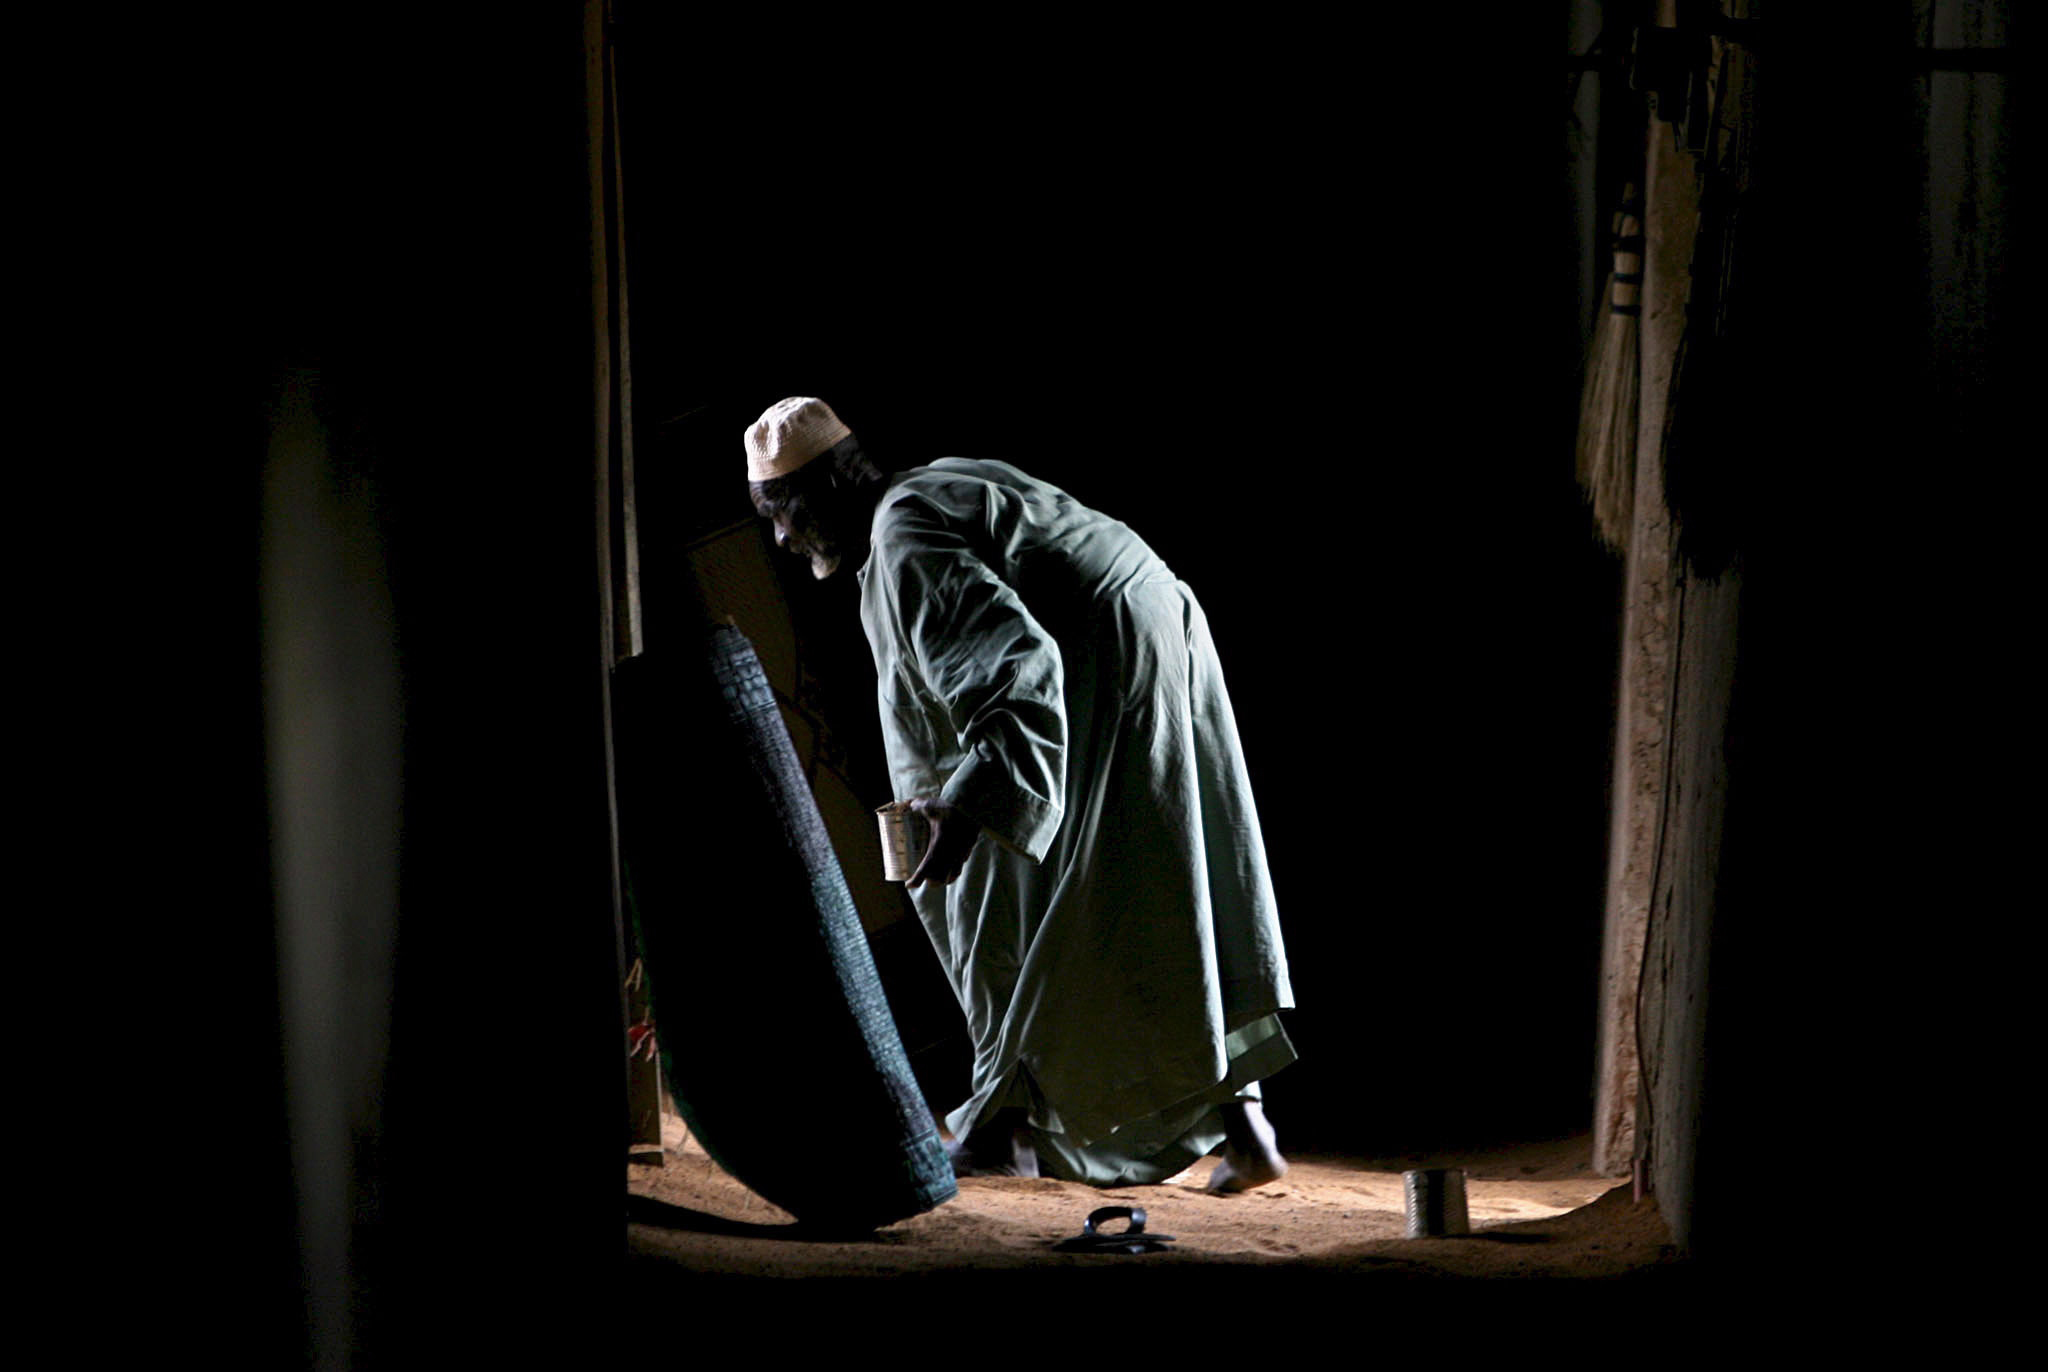 PHOTO: A man cleans inside the Grand Mosque, the largest mud-brick building in the ancient town of Djenne, one of the oldest cities in Mali in this, April 29, 2007, file photo.